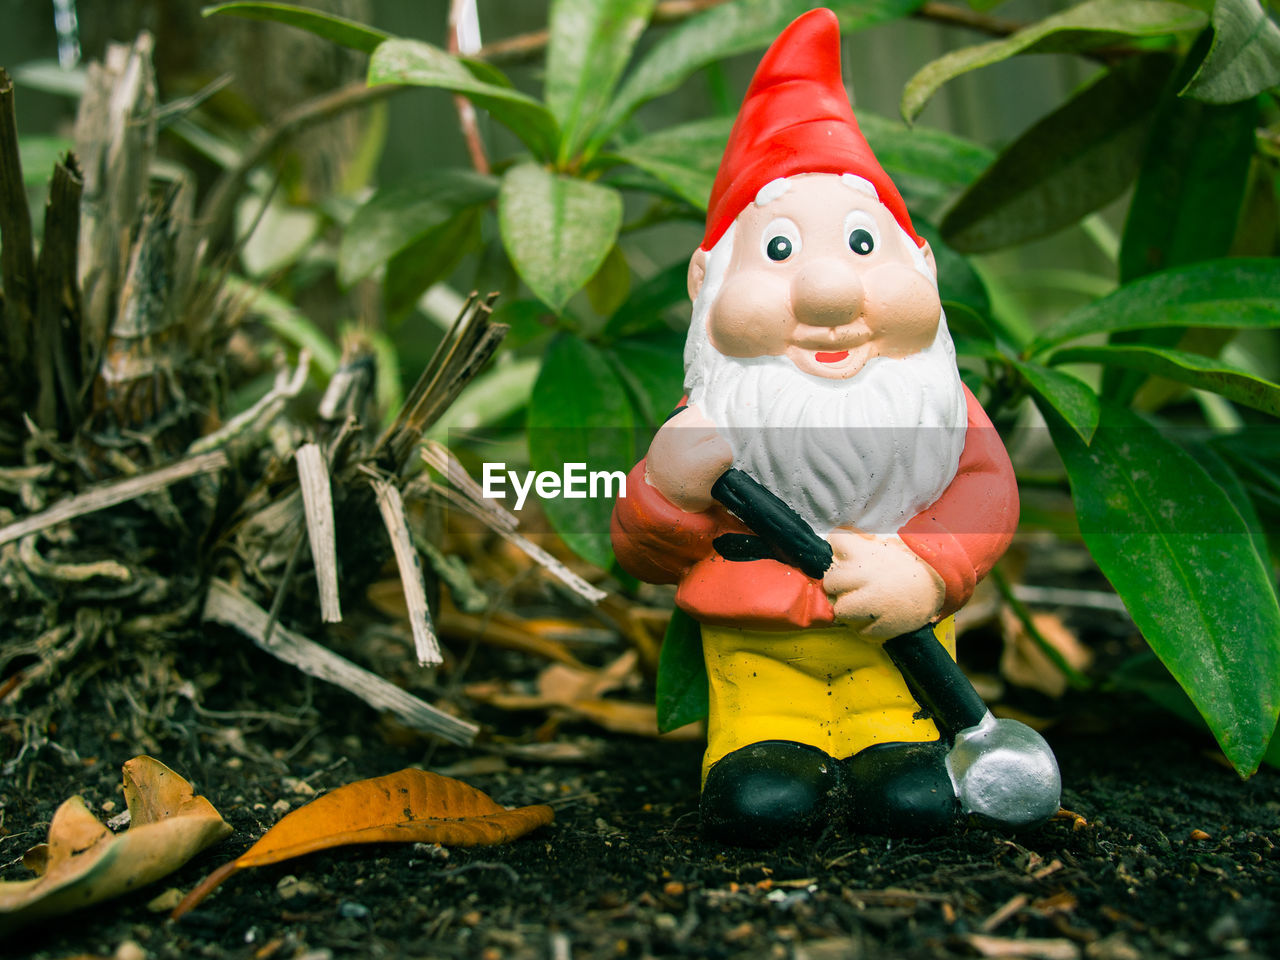 Little gnome in the garden